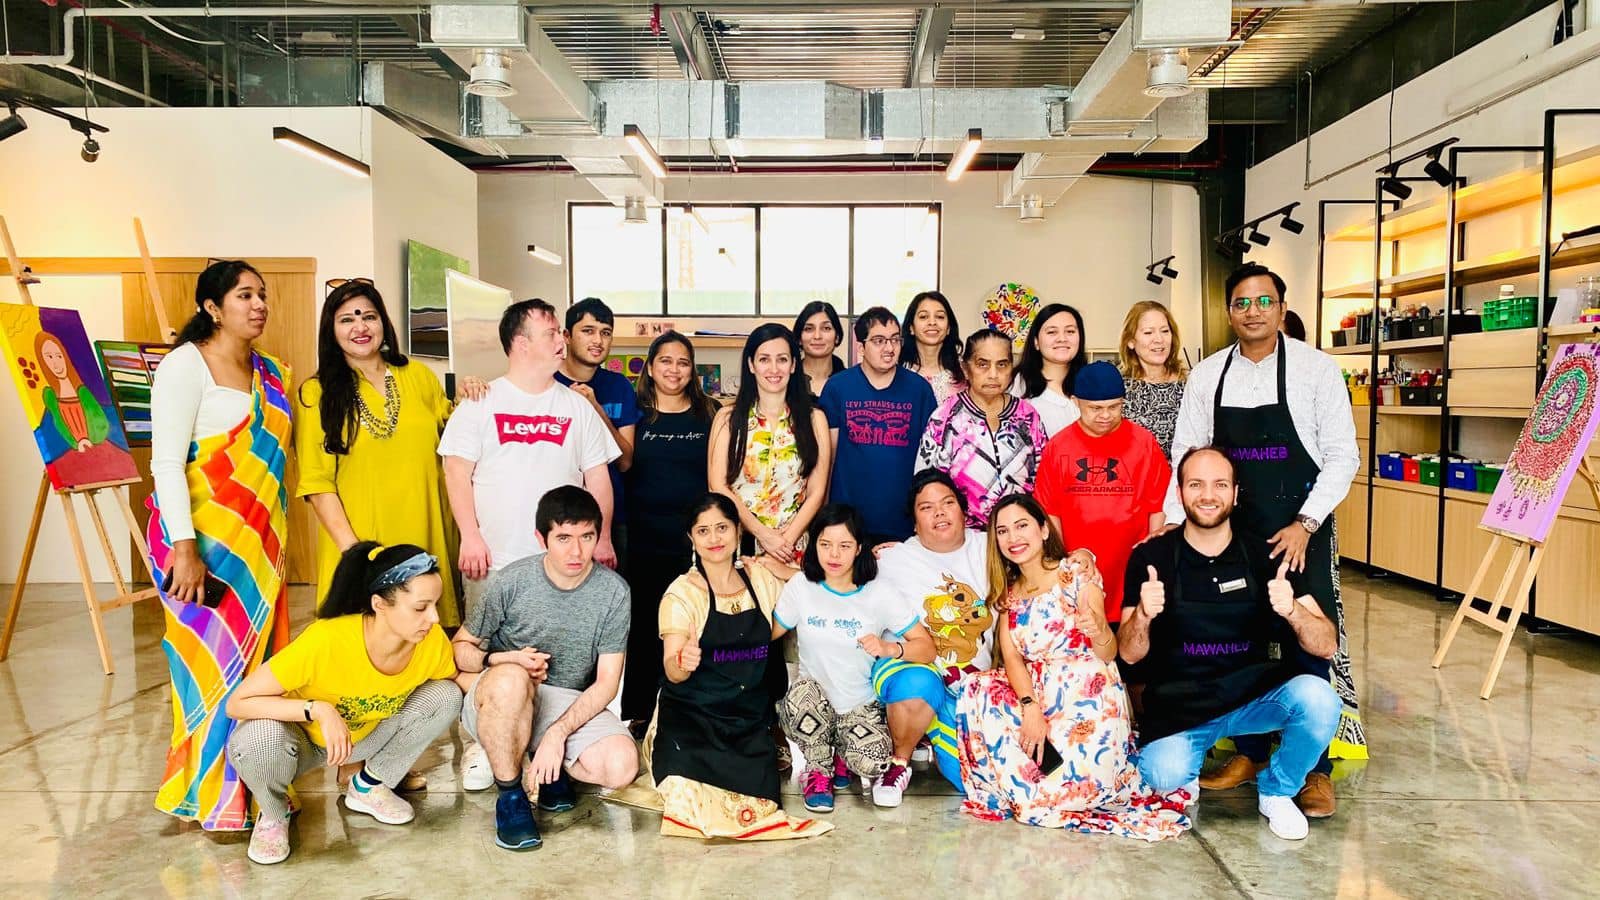 Asian Literary Society and ALS Parwaaz Forum (an initiative by ALSphere Foundation) organized an art workshop with people of determination at Mawaheb Art Studio in Dubai